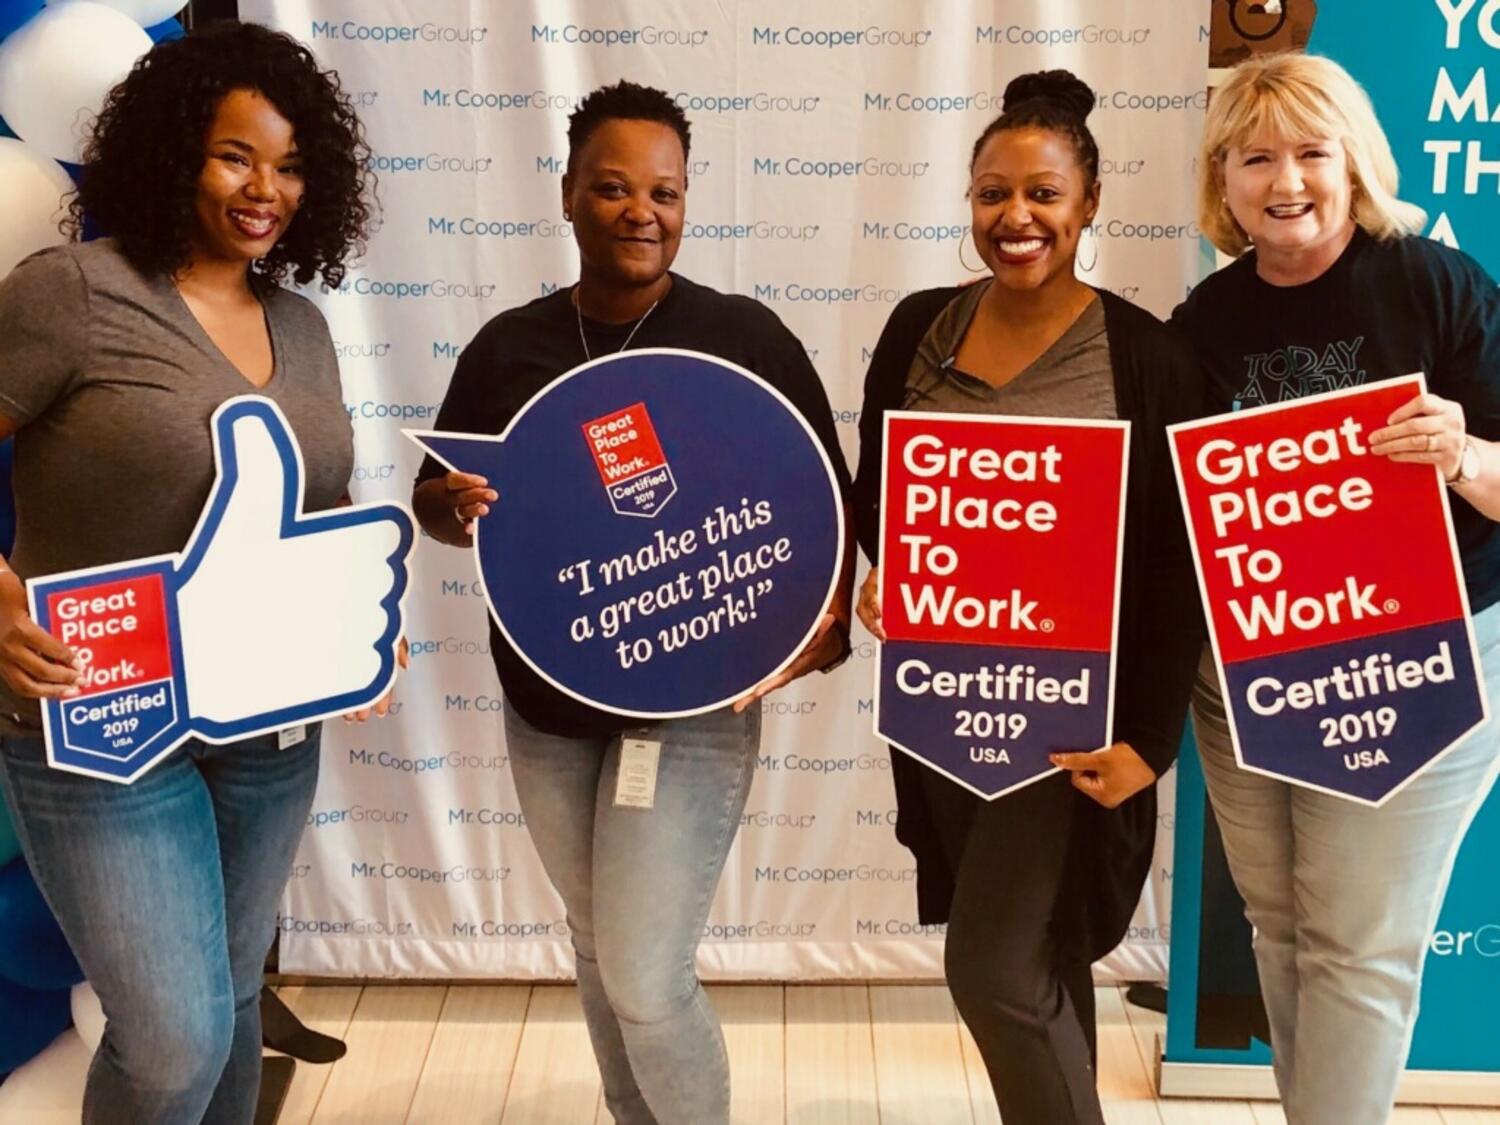  7 Ways to Celebrate Great Place To Work Certification